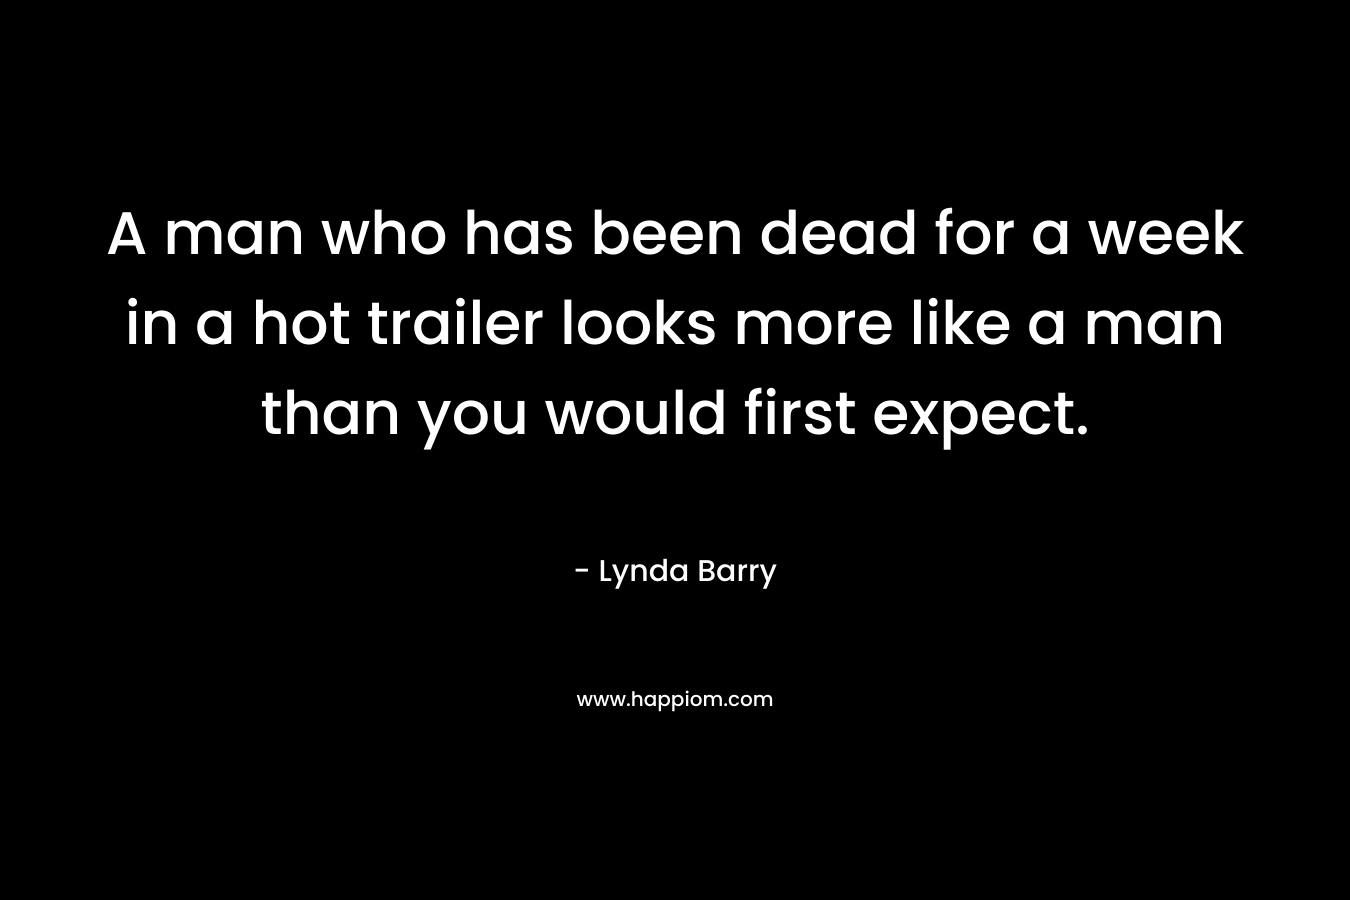 A man who has been dead for a week in a hot trailer looks more like a man than you would first expect. – Lynda Barry